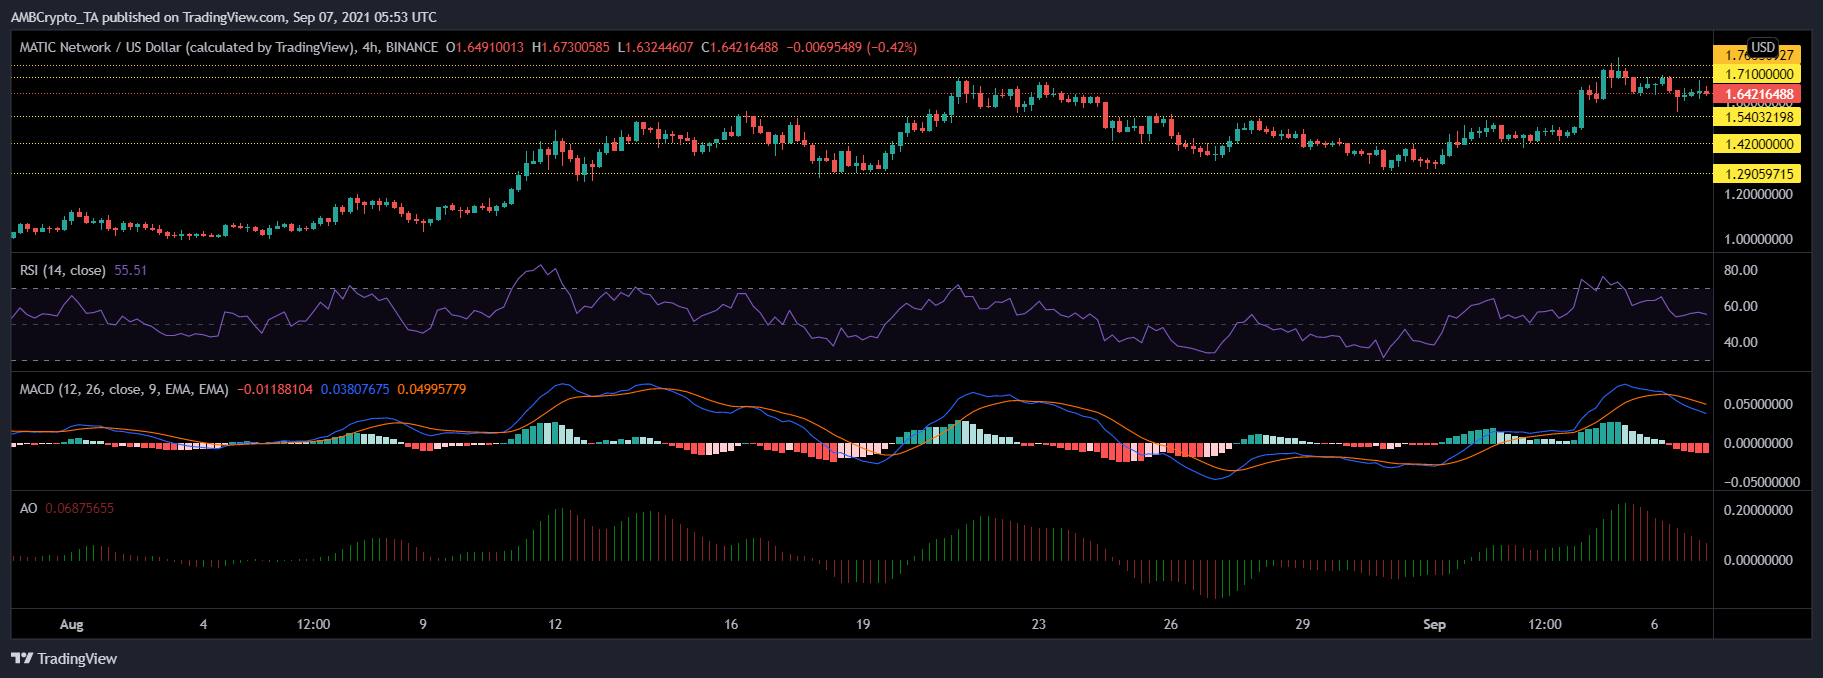 Tron, MATIC and WAVES Price Analysis: 07 September 